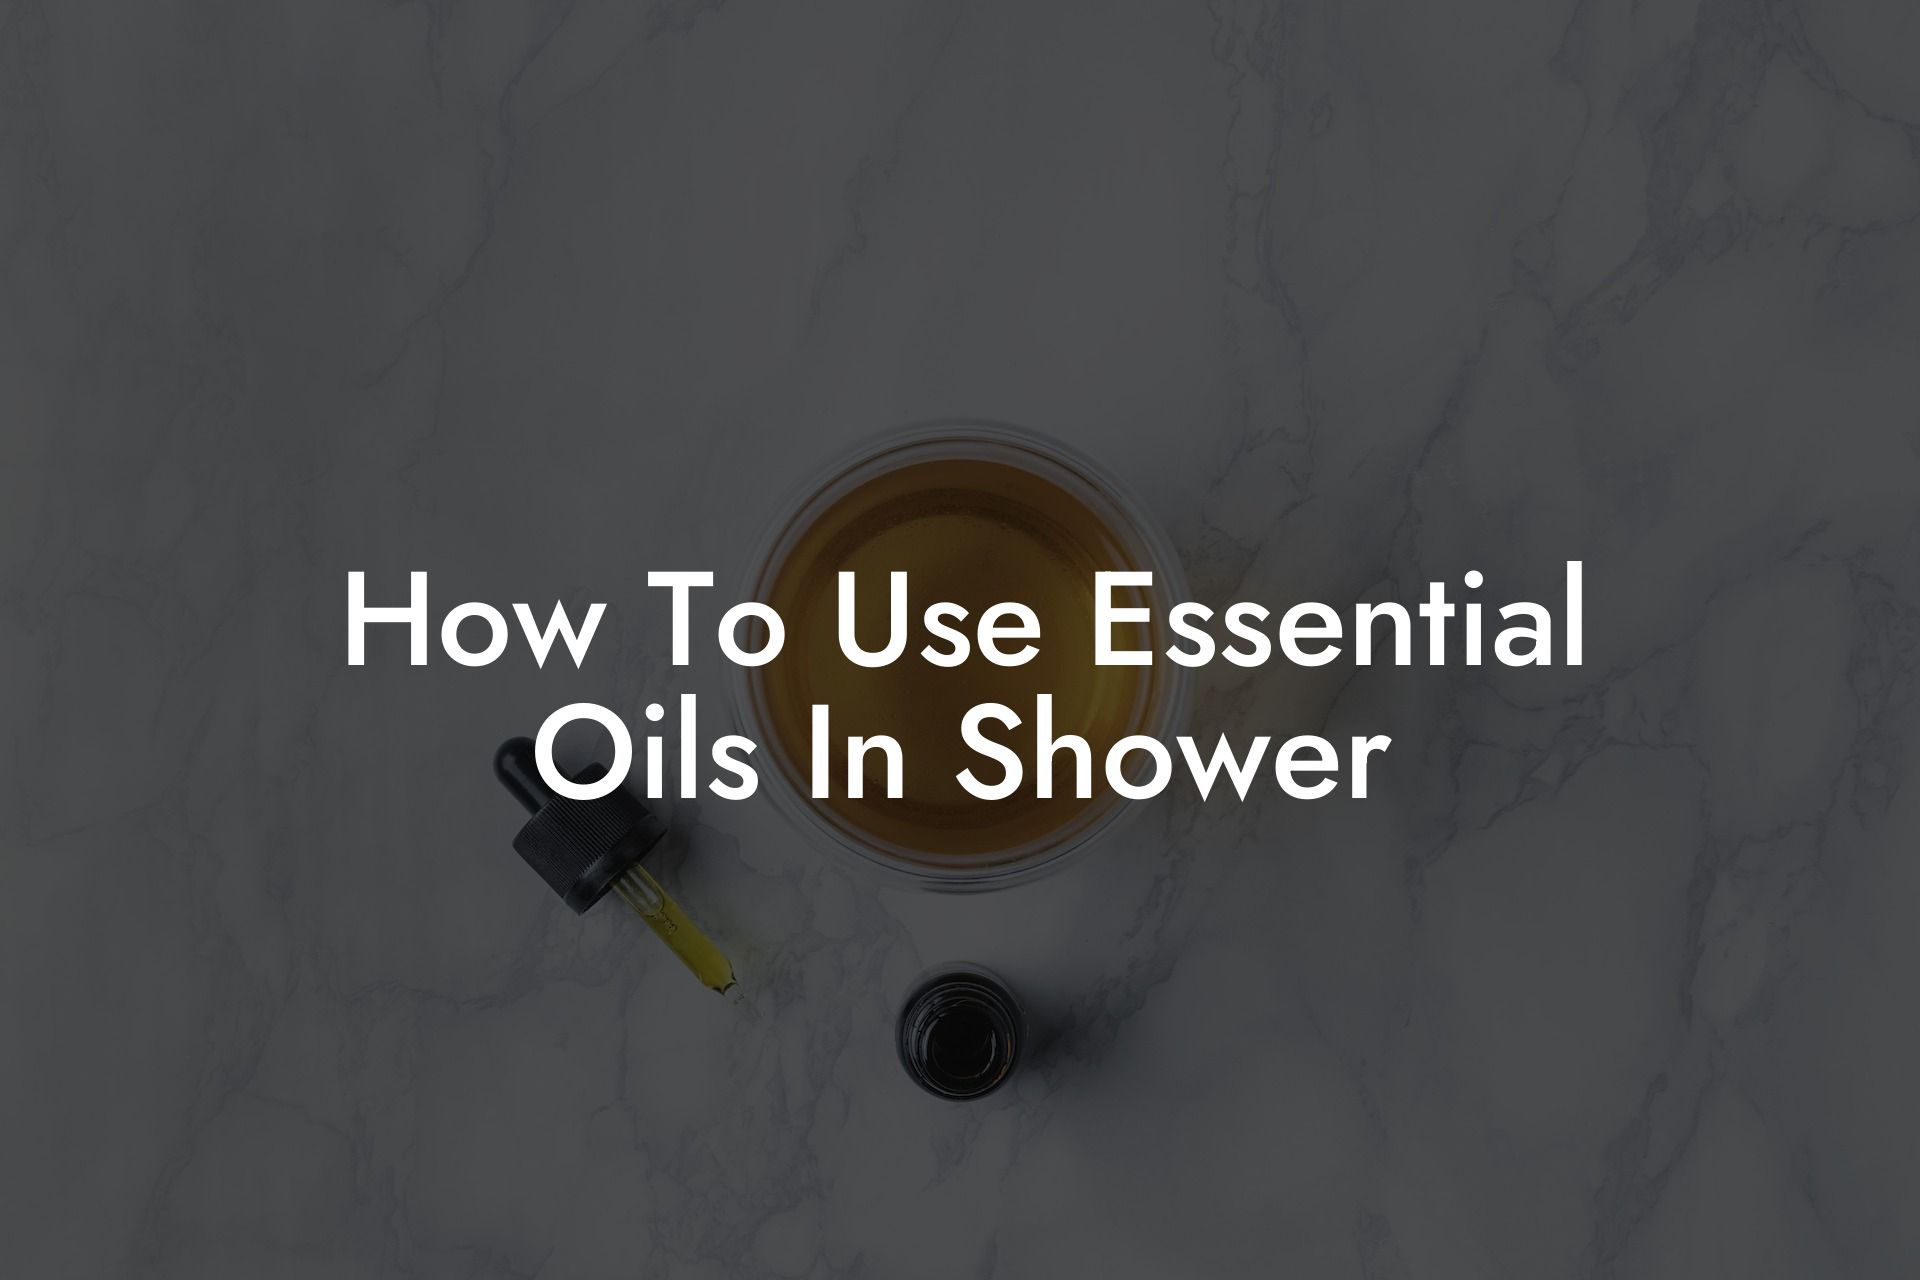 How To Use Essential Oils In Shower